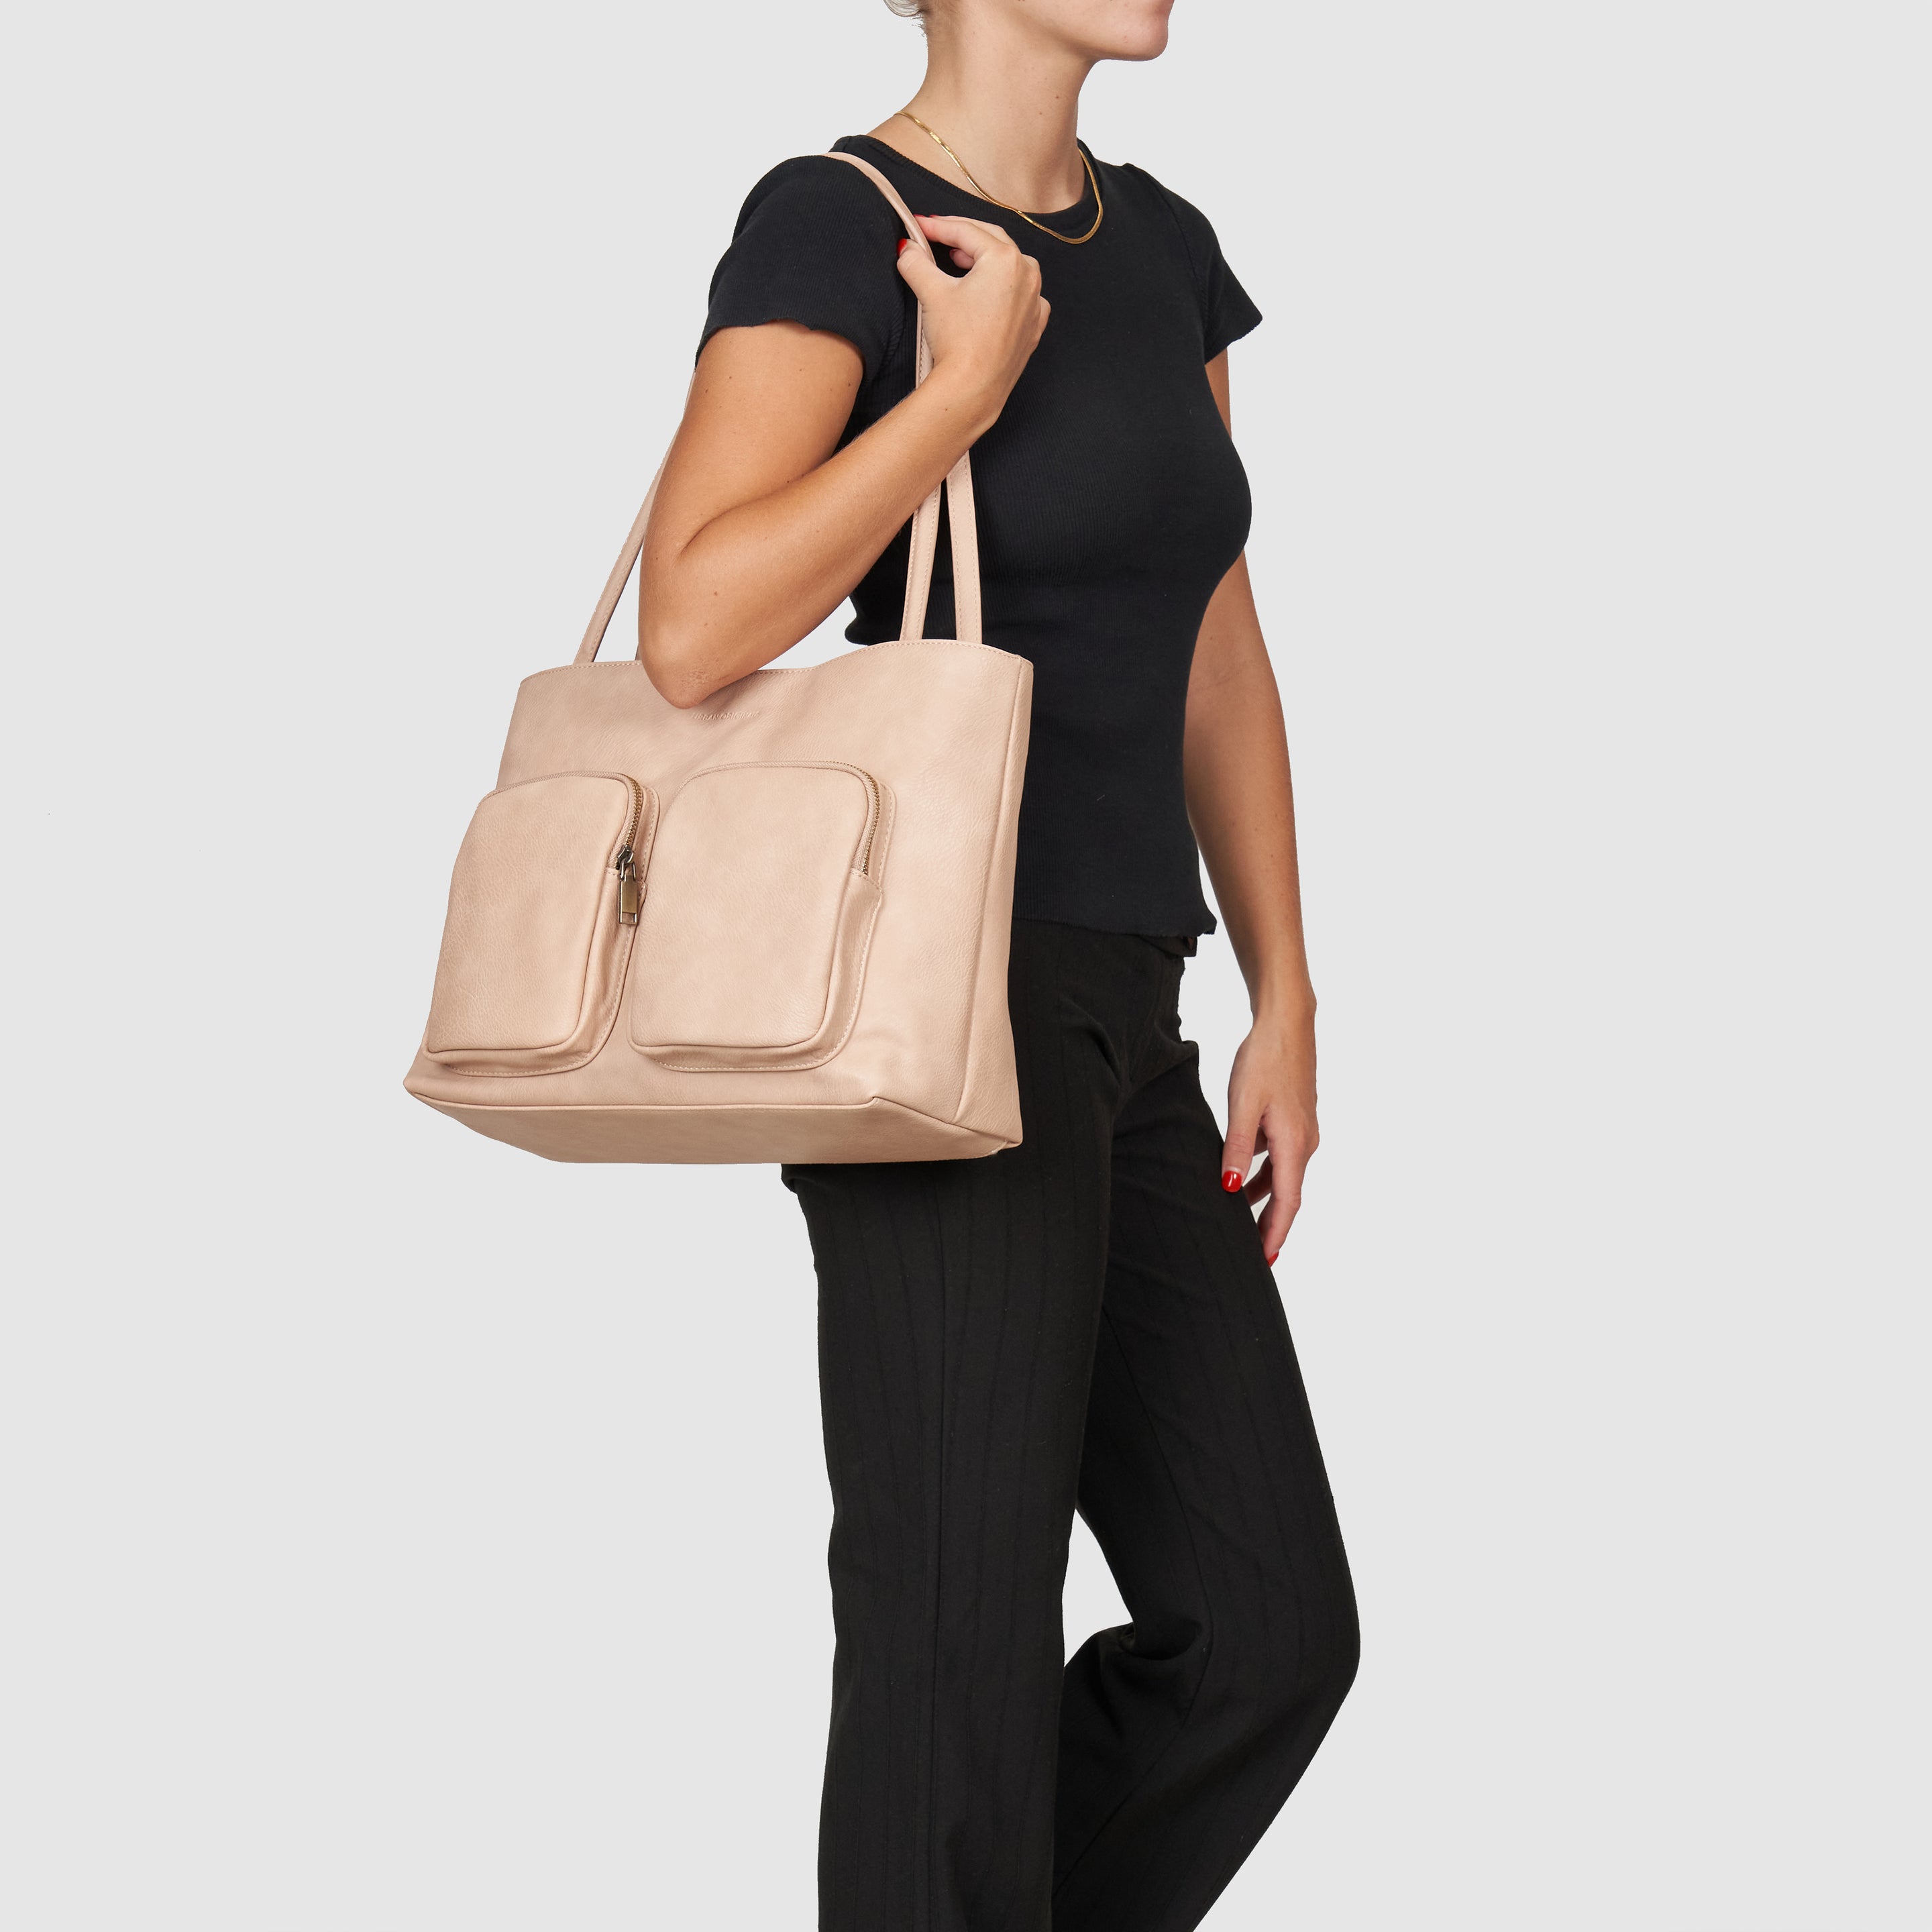 Load image into Gallery viewer, The Local Tote - Taupe
